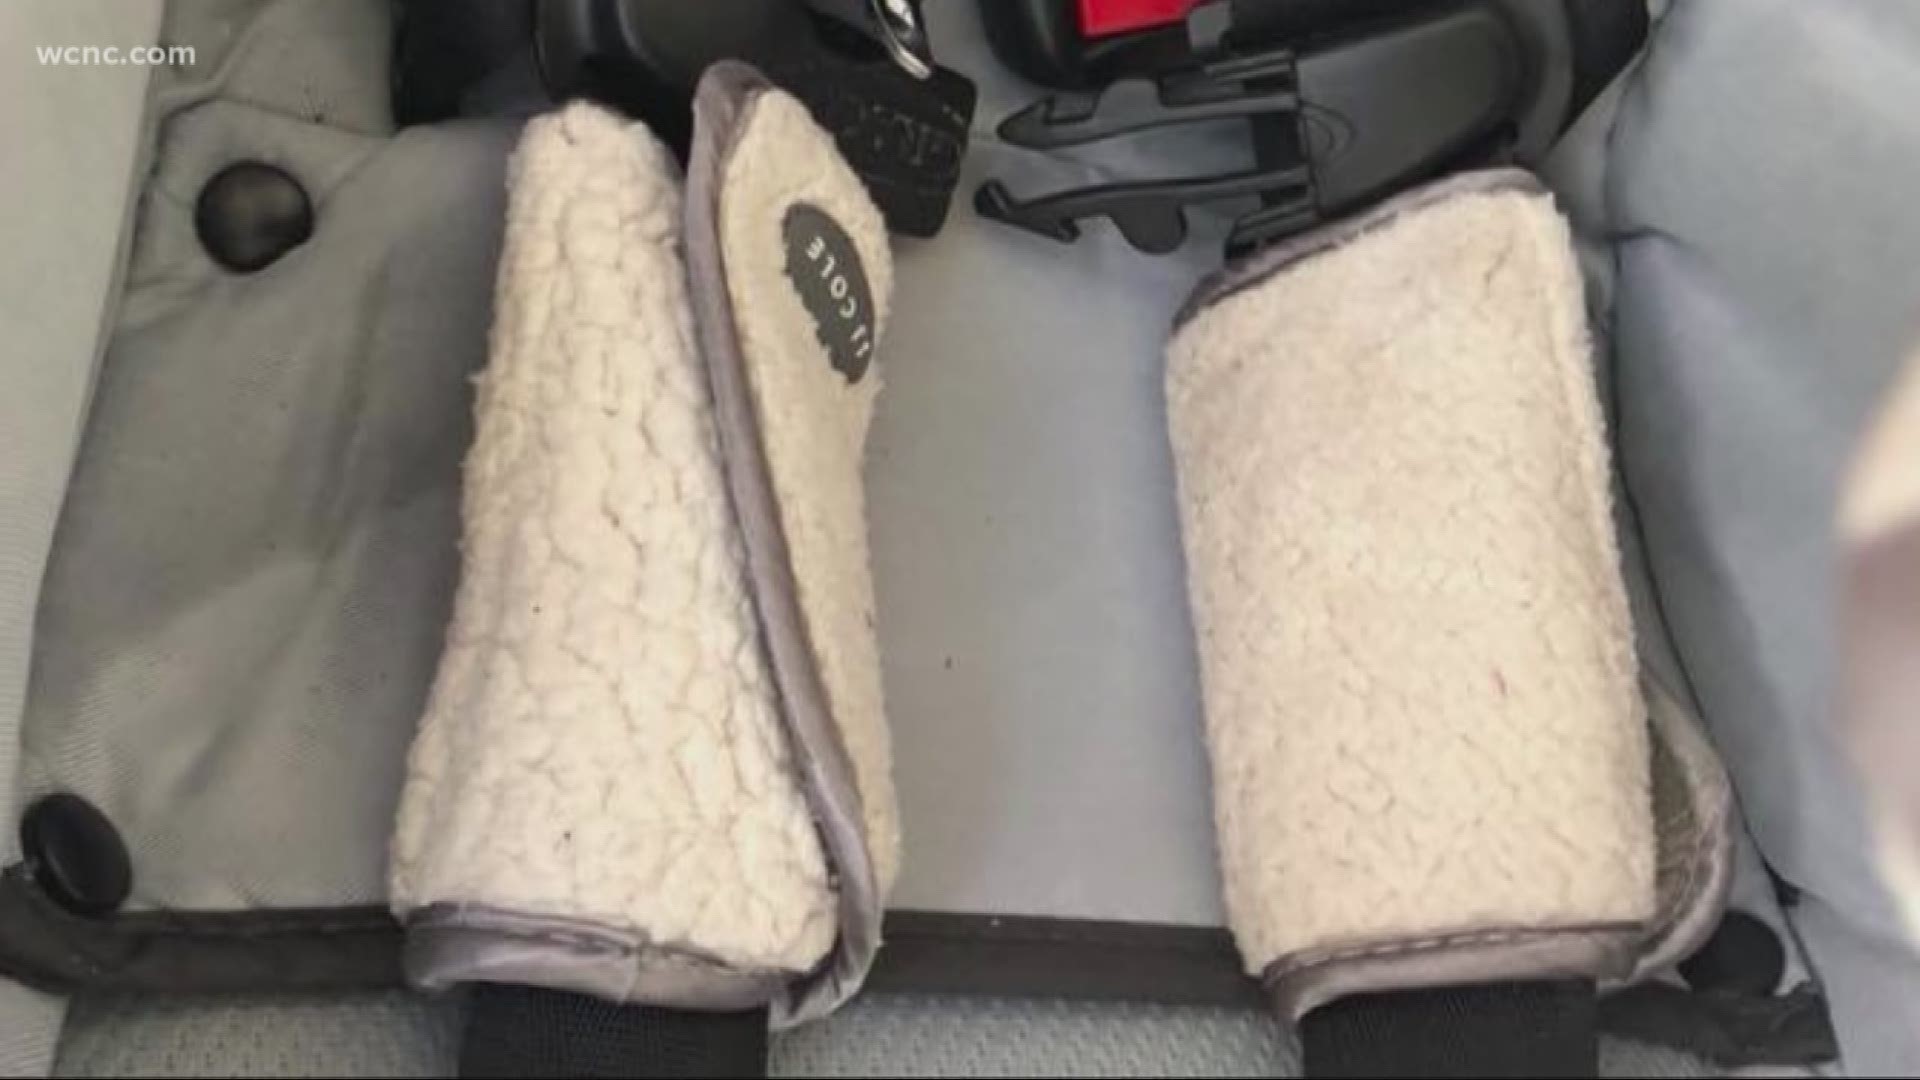 Mom warns parents about car seat strap covers